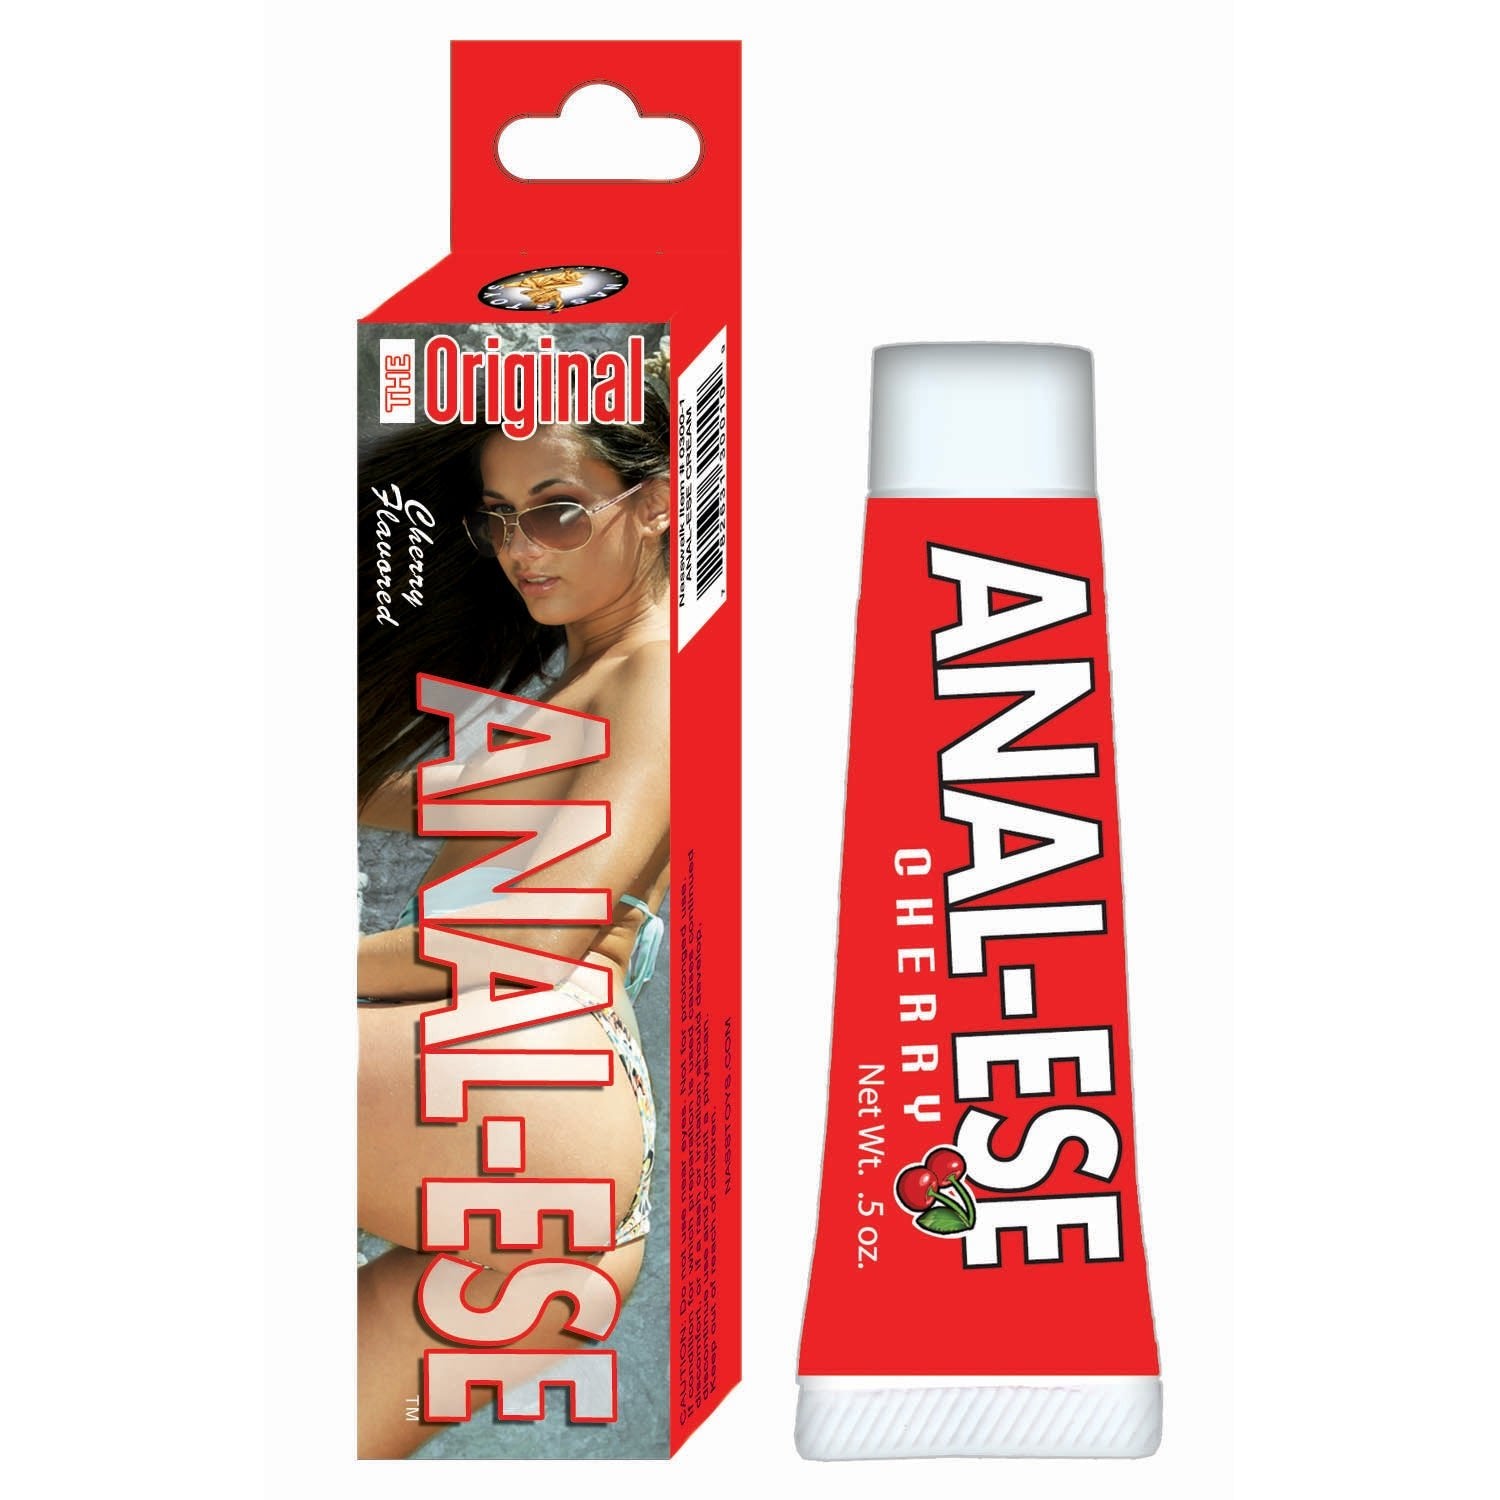 Anal Ese Original Cherry - 2 Sizes Available! | CheapLubes.com